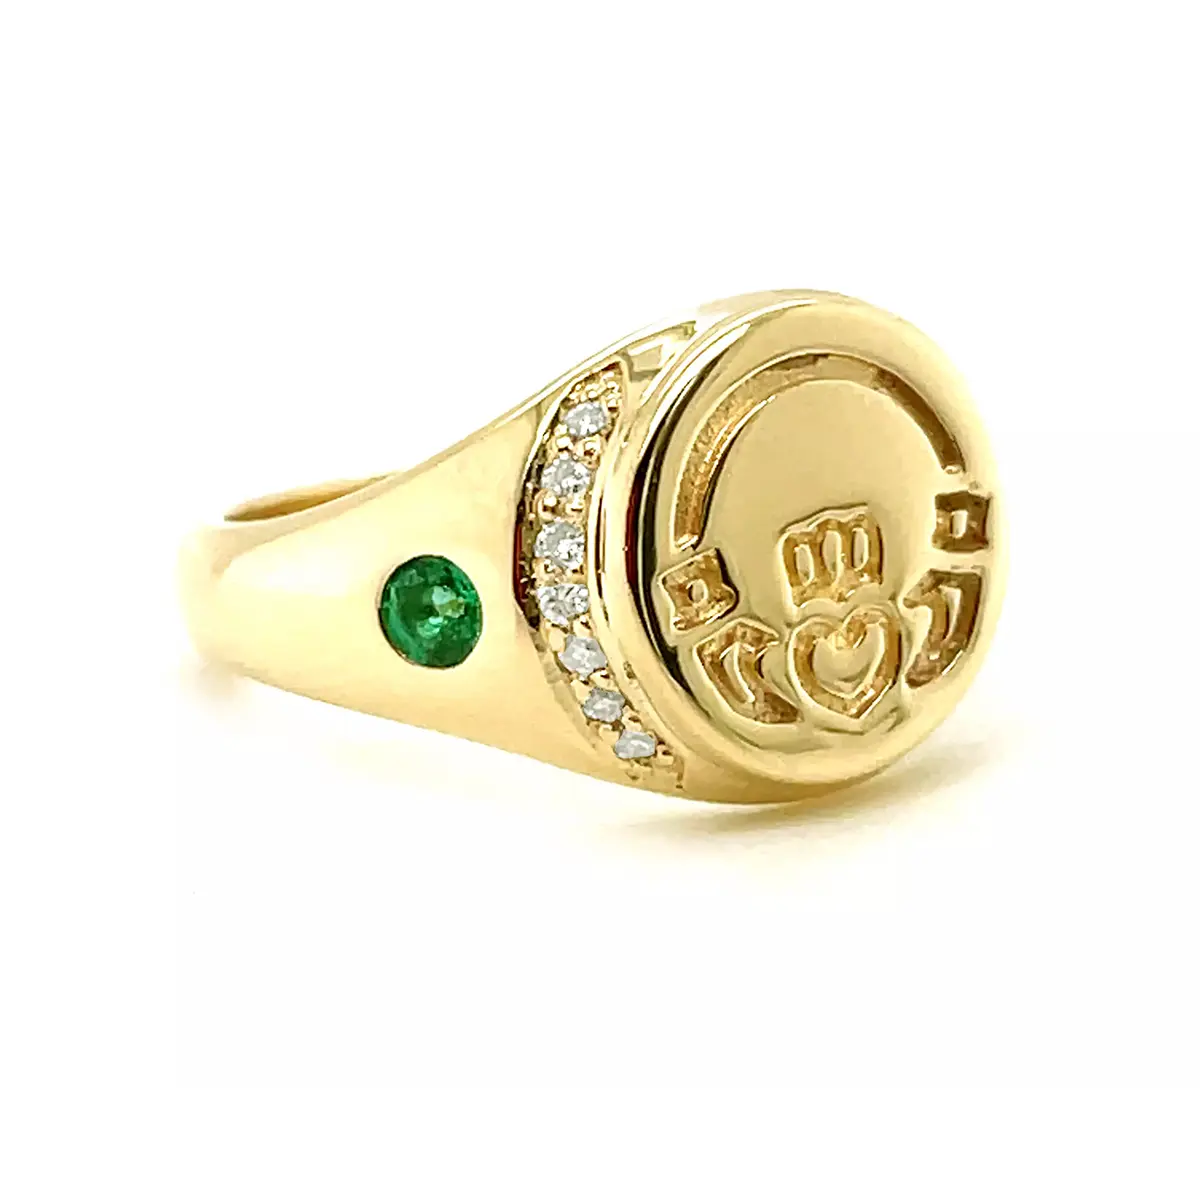 1_gold And Emerald Mens Seal Ring